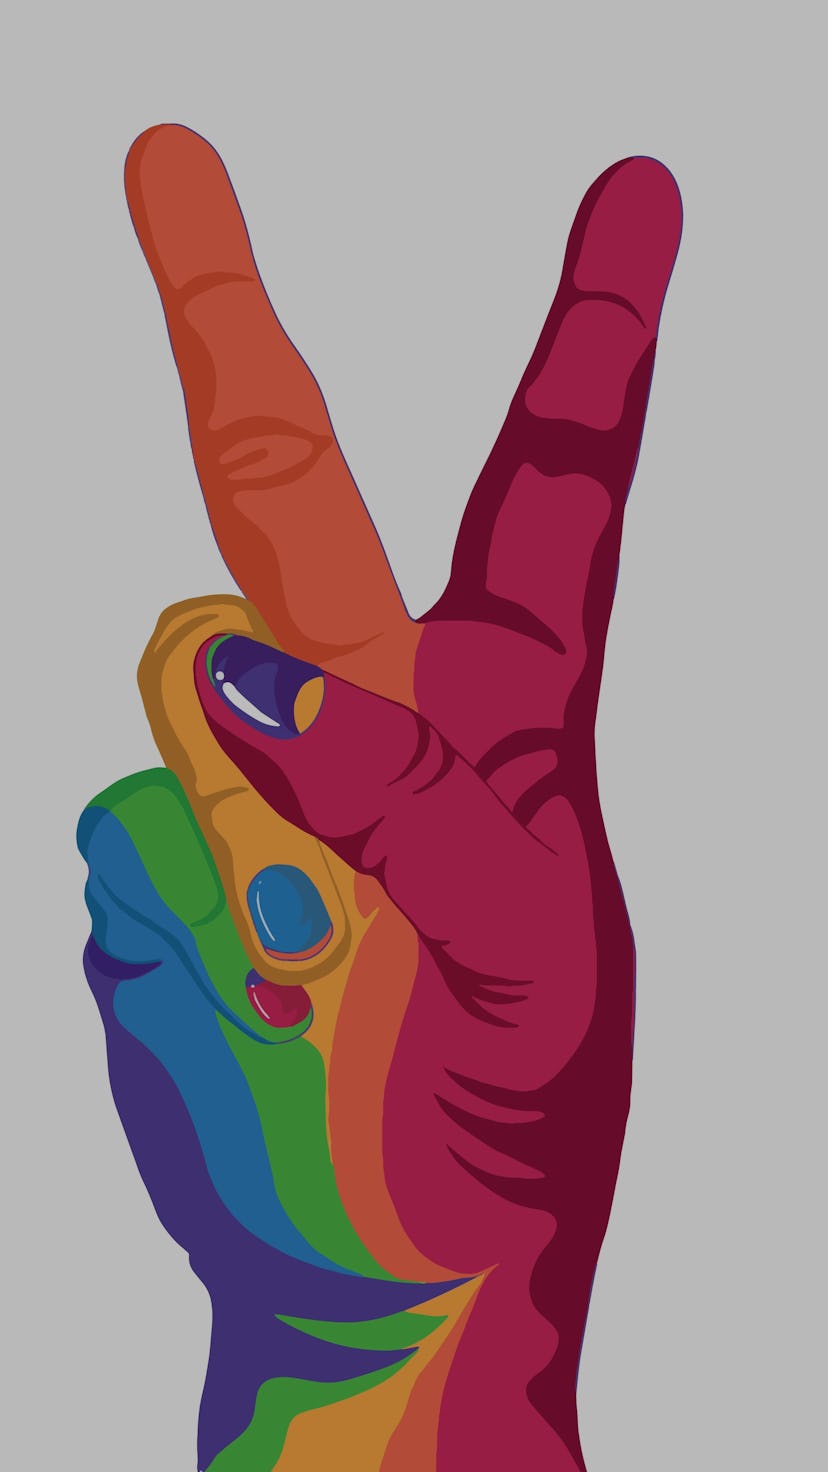 LGBTQ+ Rainbow colored Victory hand raised up Vector illustration isolated on white Background. Gay ...